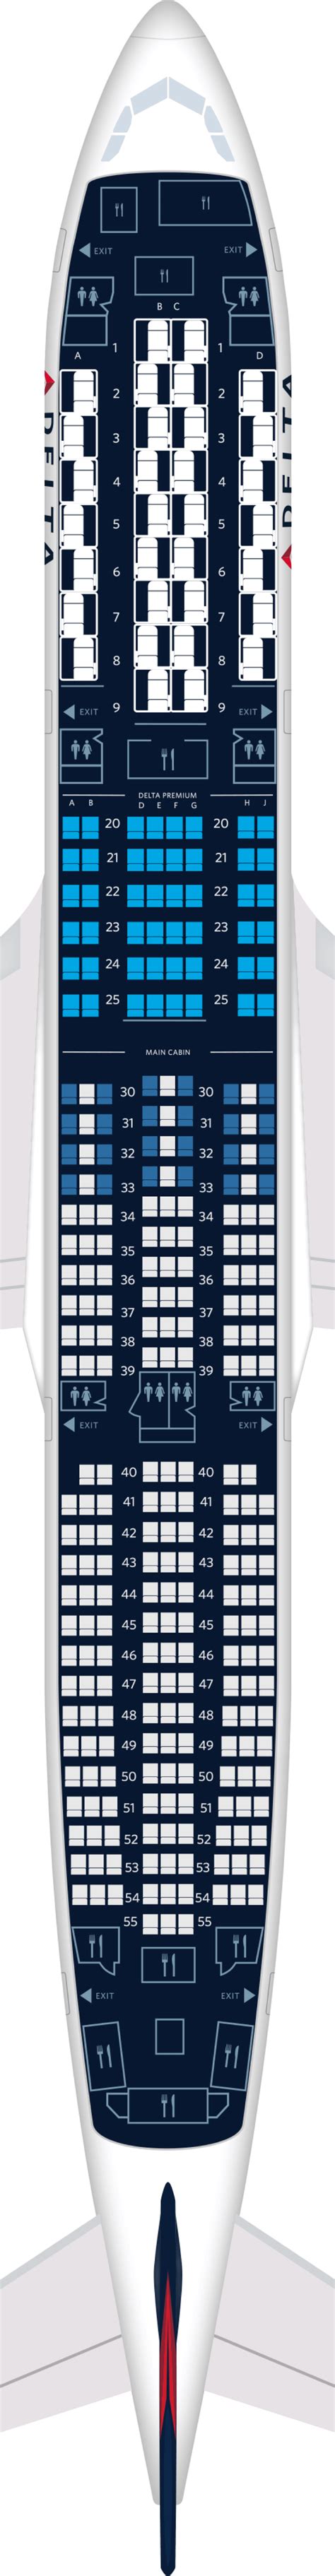 Airbus A350 1000 Delta Seat Map Image To U